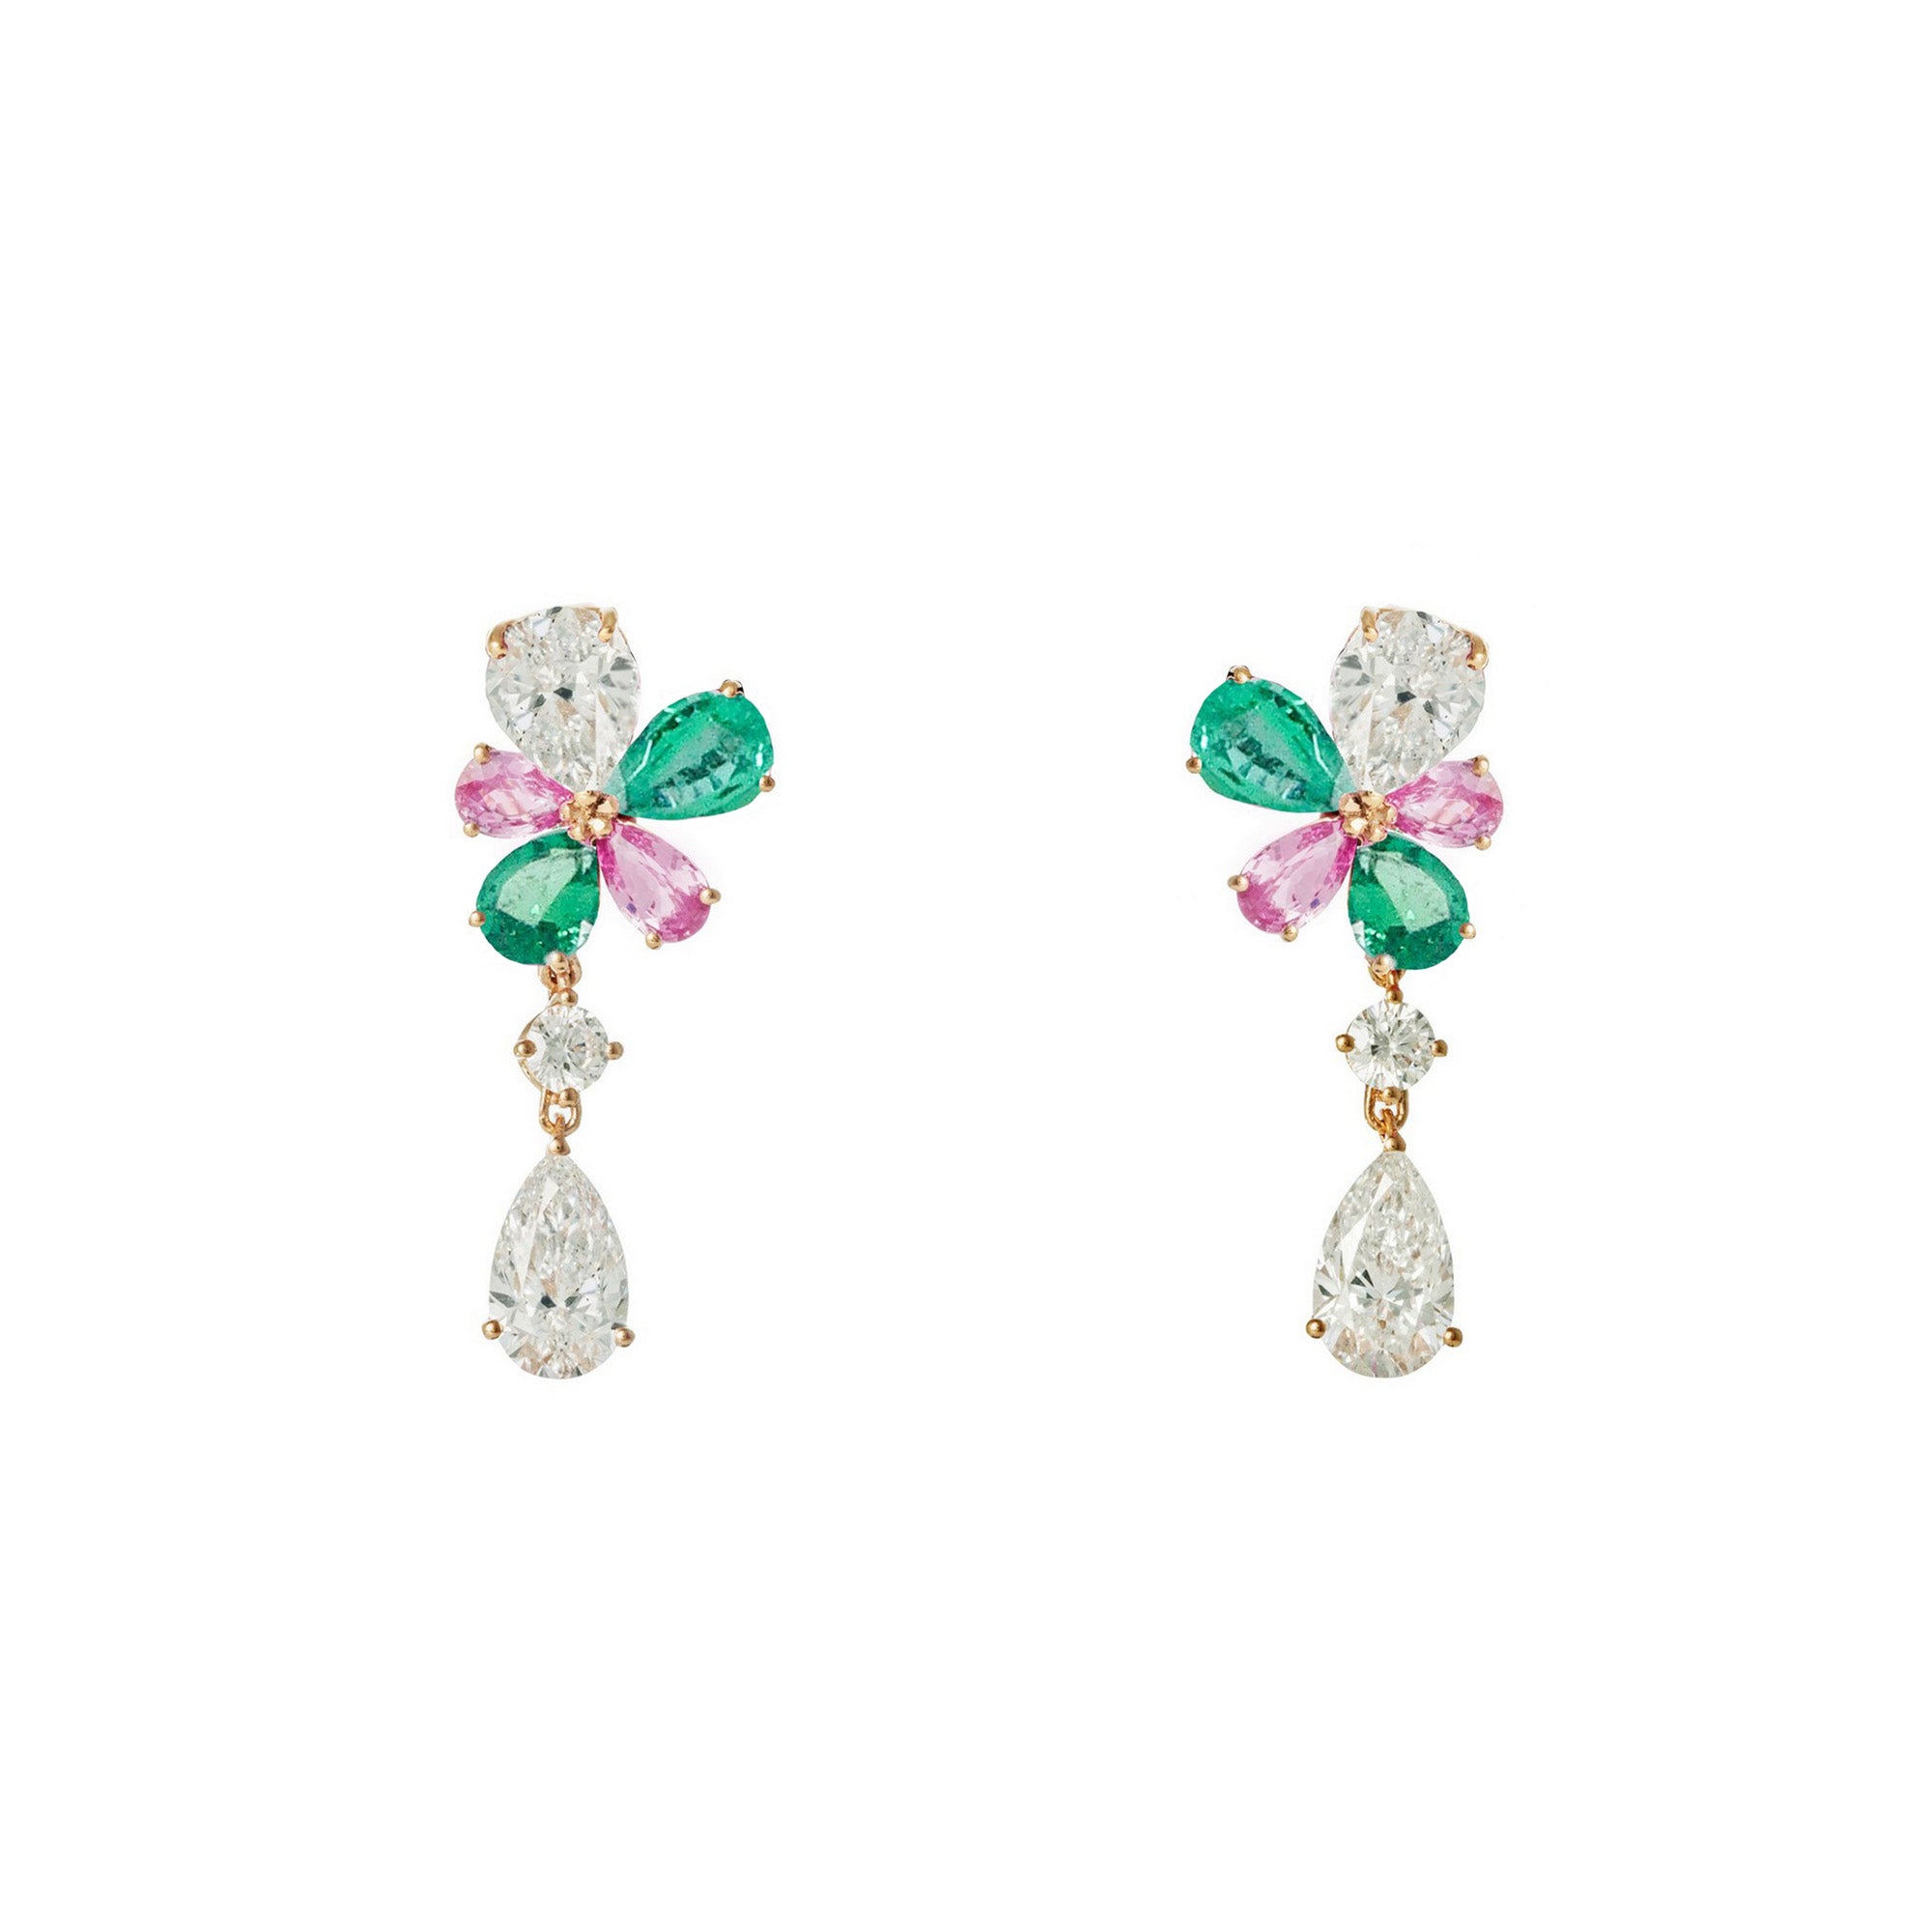 Prato Fiorito Rose Gold Earrings With Emeralds Pink Sapphires Diamonds